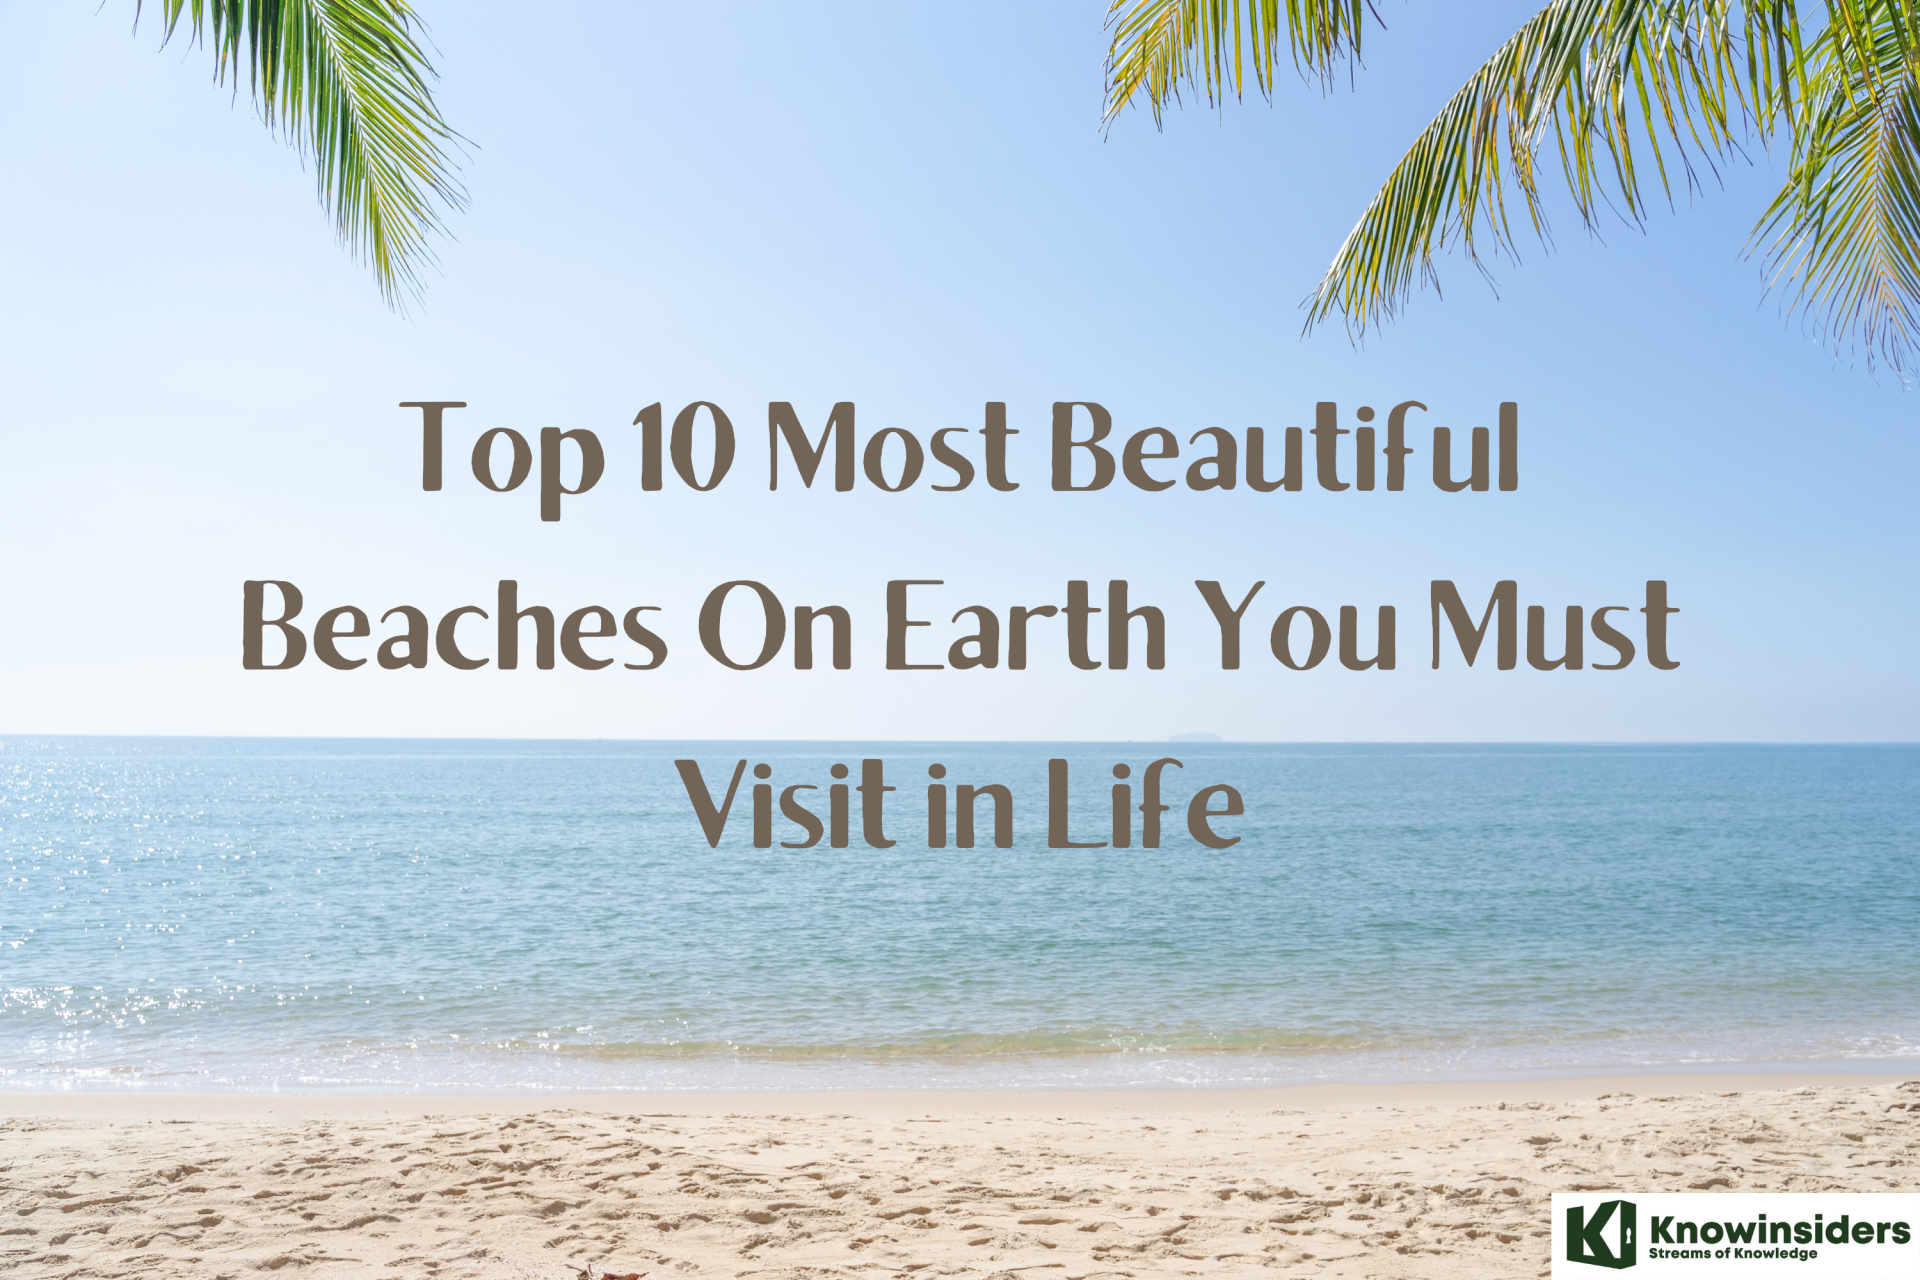 Top 10 Most Beautiful Beaches On Earth You Must Visit in Life